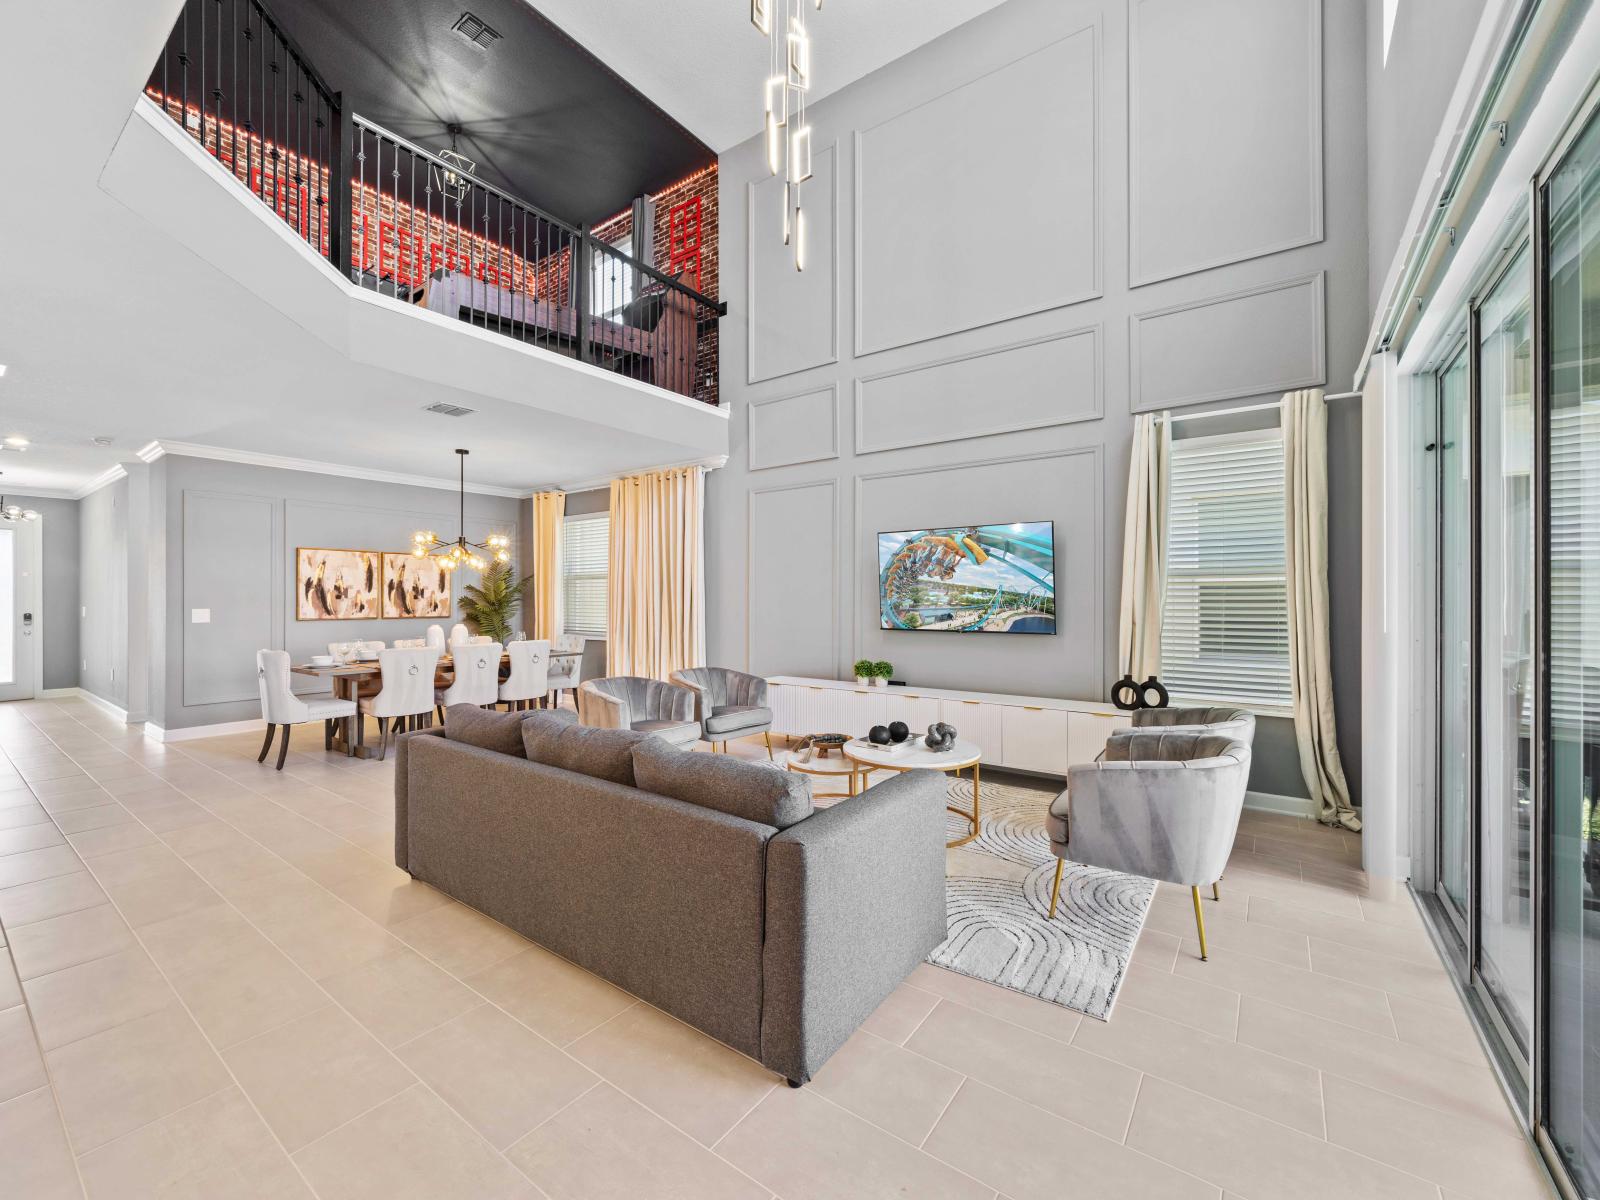 Magnificent Living Area of the Home in Davenport Florida - Unwind in style in thoughtfully curated living area - Featuring a harmonious blend of upscale decor and inviting ambiance - Smart TV and Netflix - High Ceilings